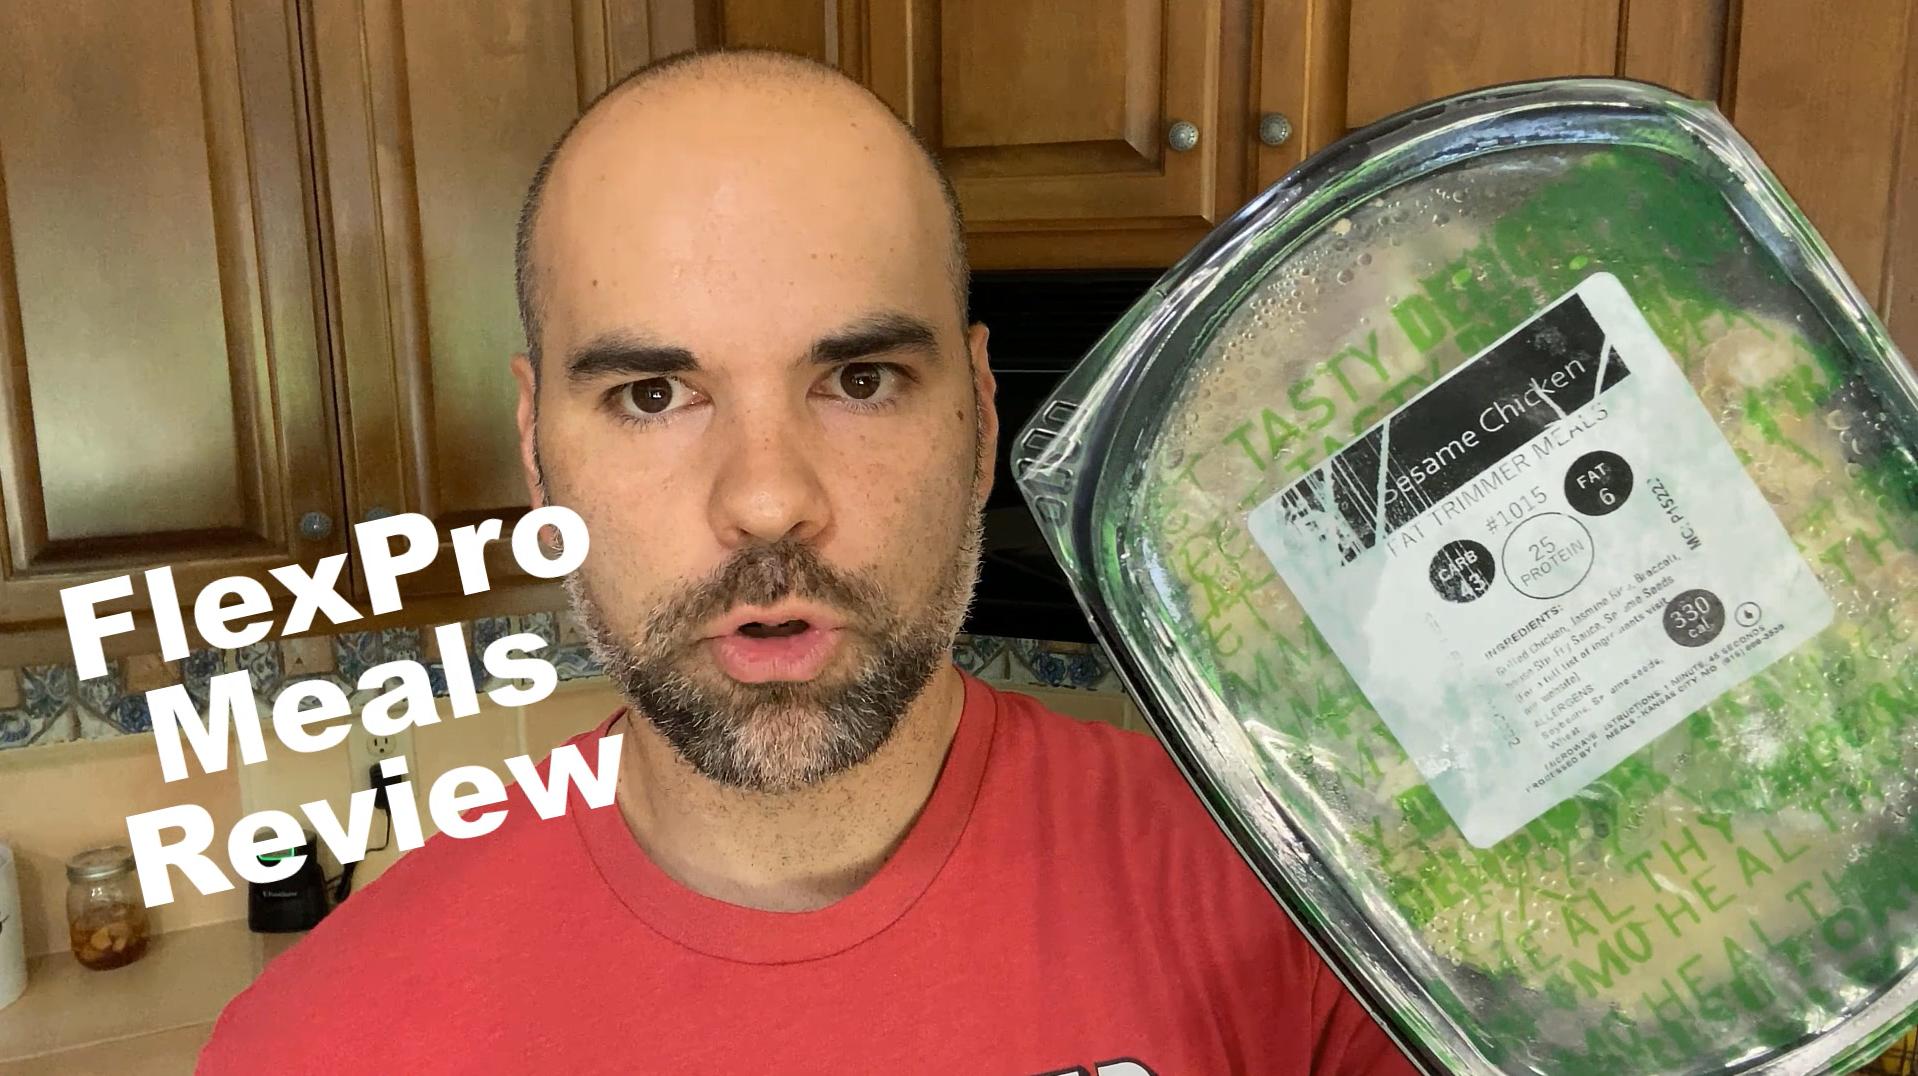 FlexPro-Meals-Review Meal-Prep-Kit-Review